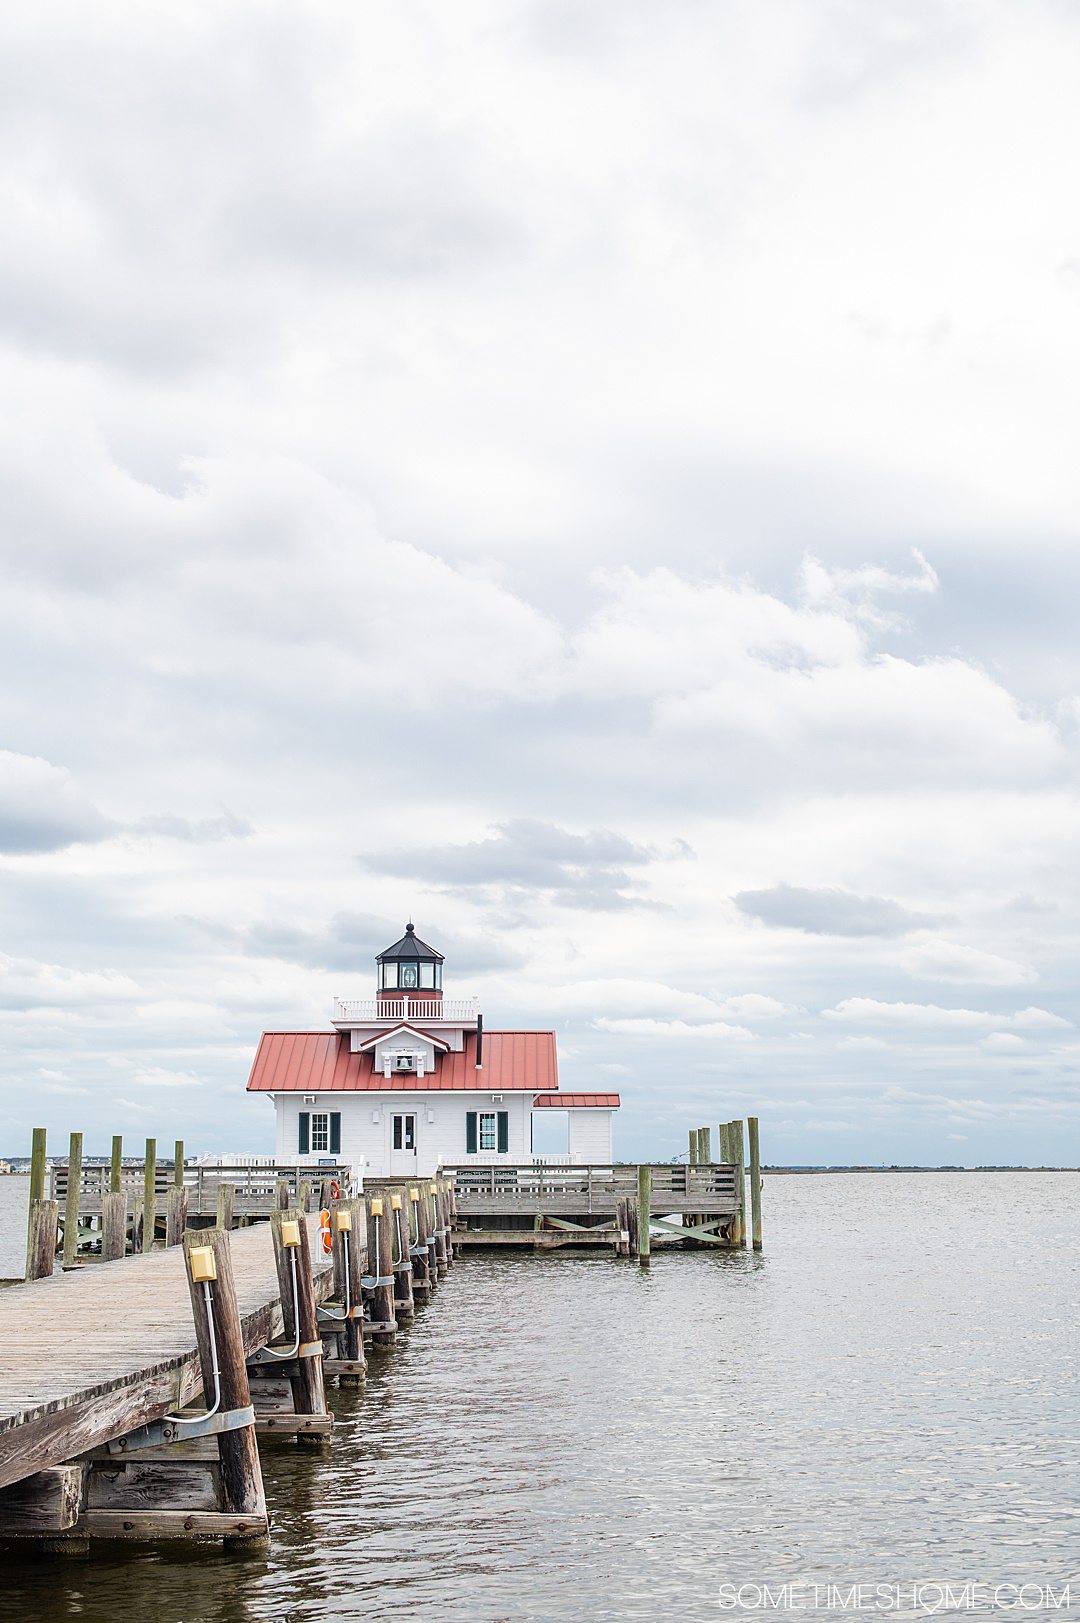 A small house at the end of the boardwalk over water and white clouds in a light blue sky. The top serves as a small lighthouse on Roanoke Island.